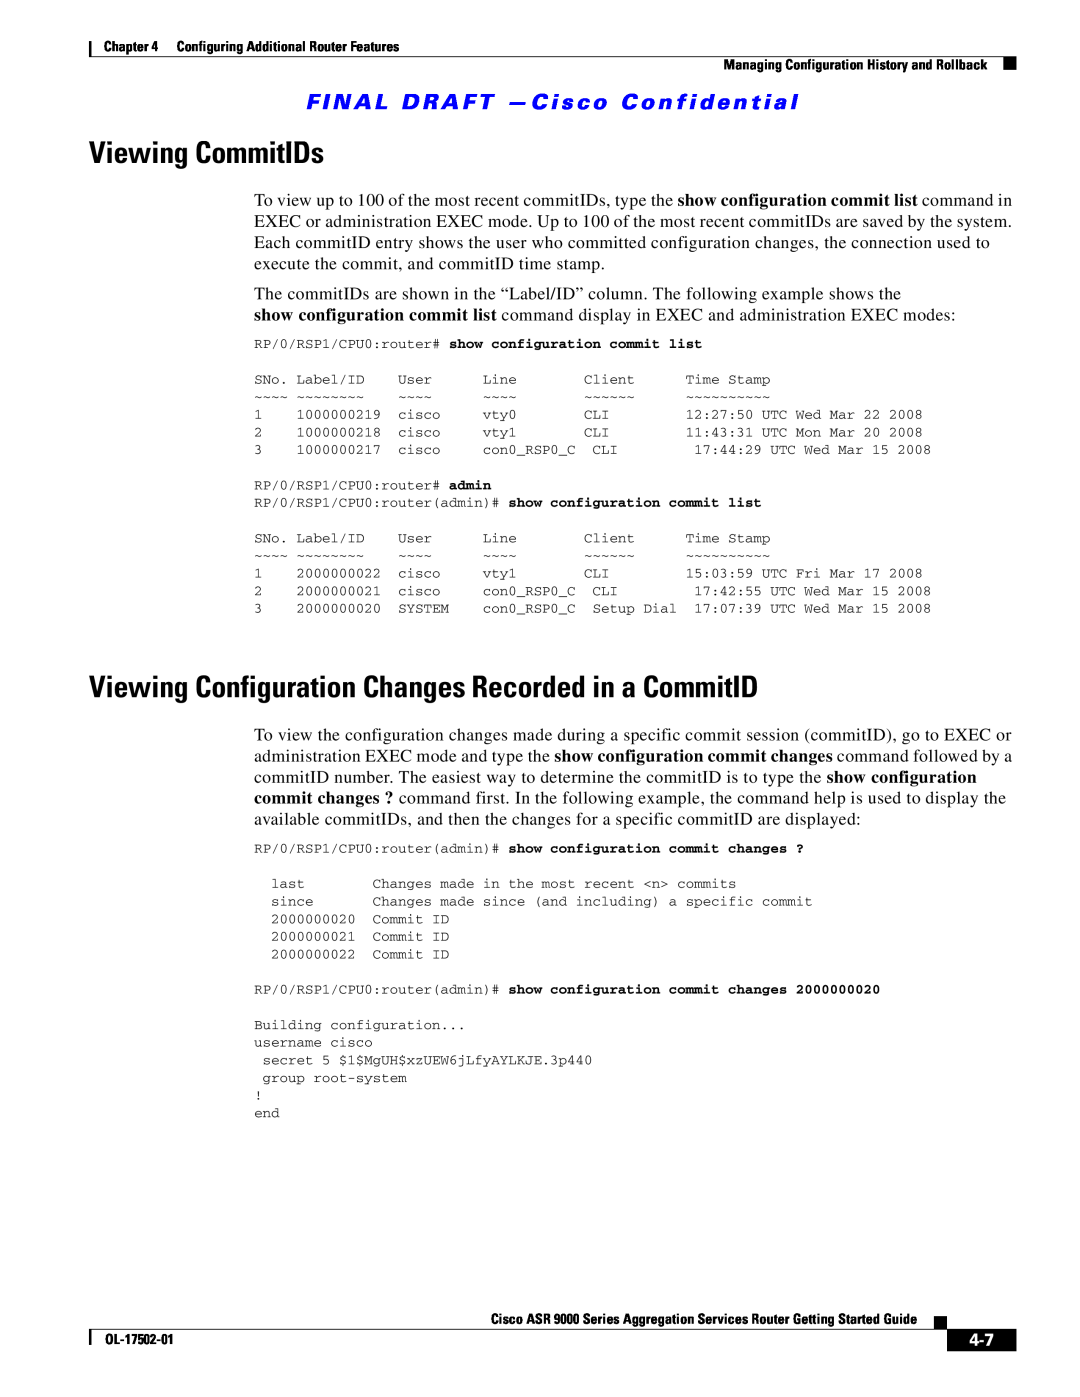 Cisco Systems A9KMOD80TR, ASR 9000, A9K24X10GETR Viewing CommitIDs, Viewing Configuration Changes Recorded in a CommitID 